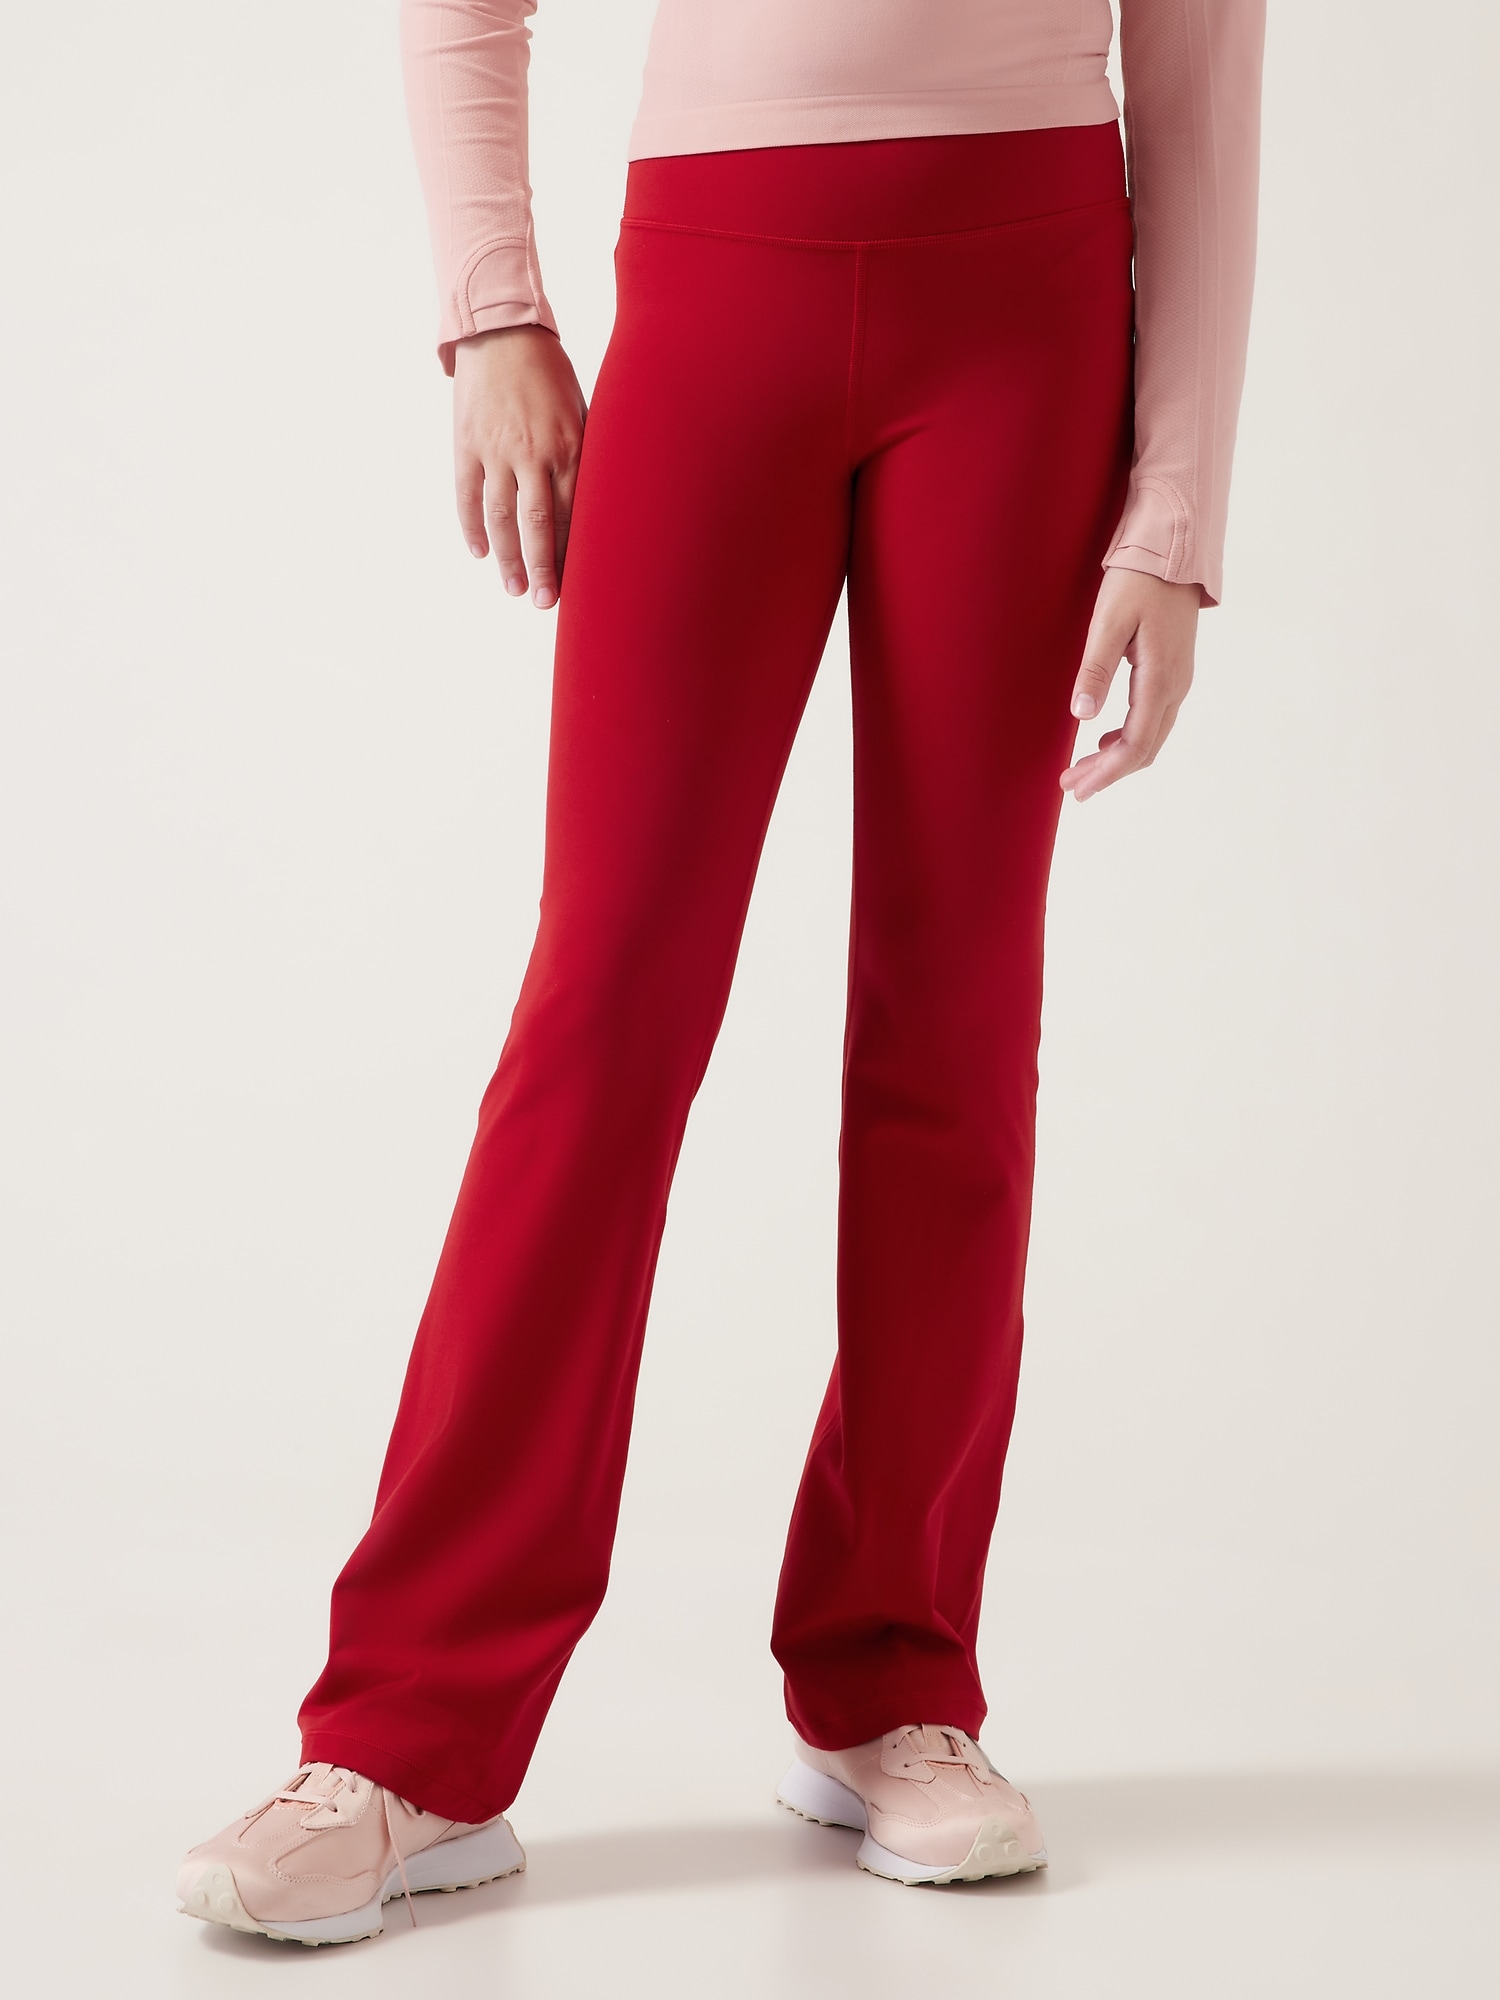 Athleta Girl High Rise Chit Chat Flare Pant red - 986583073